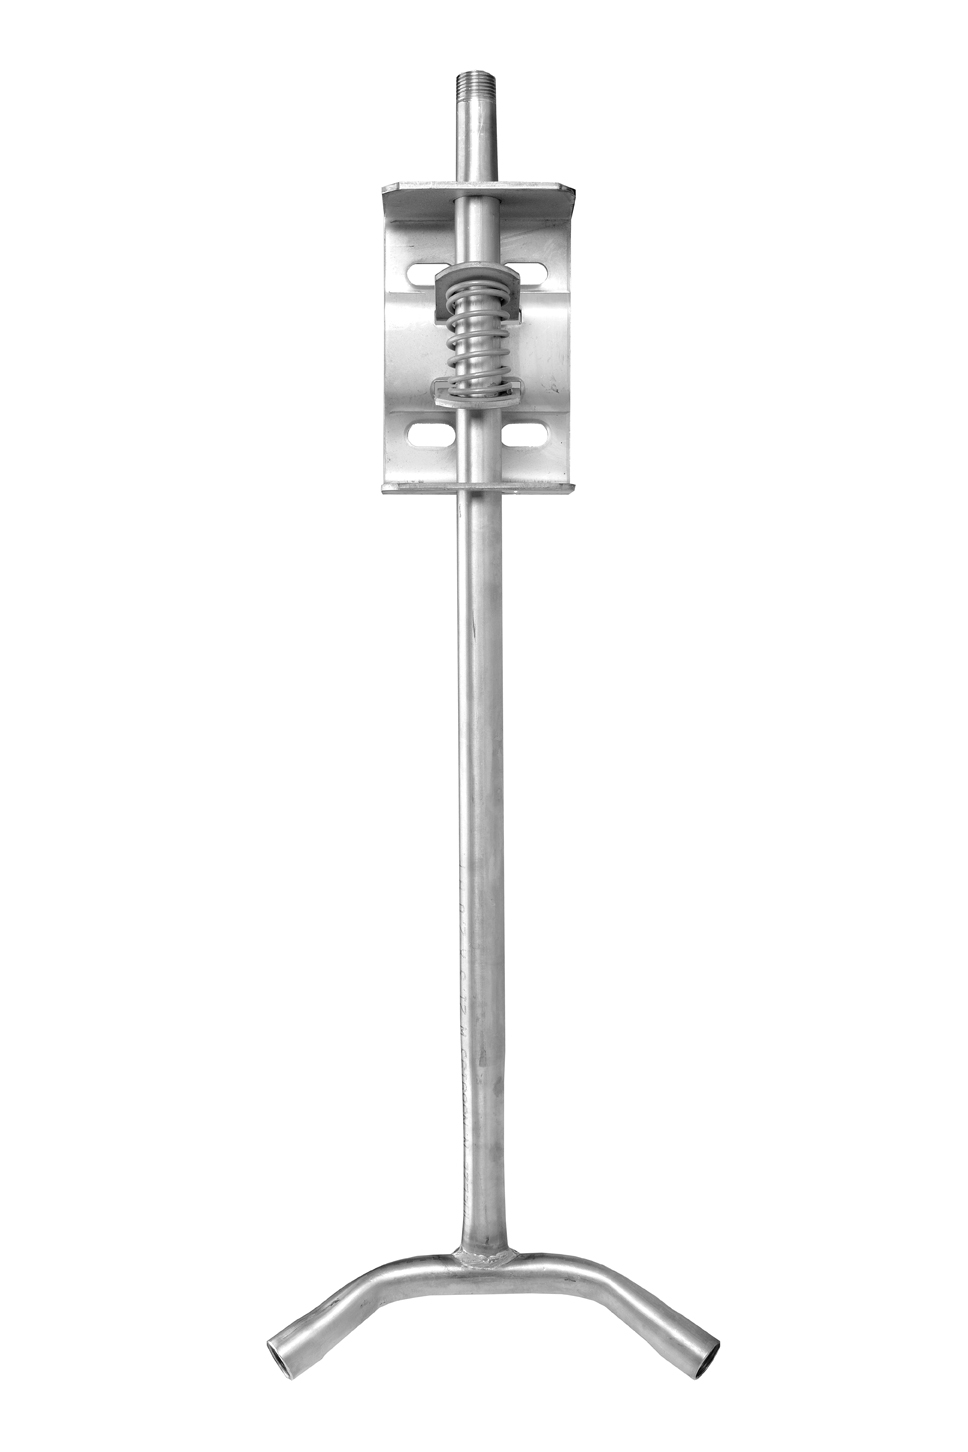 Stainless steel height-adjuster type double- code 131